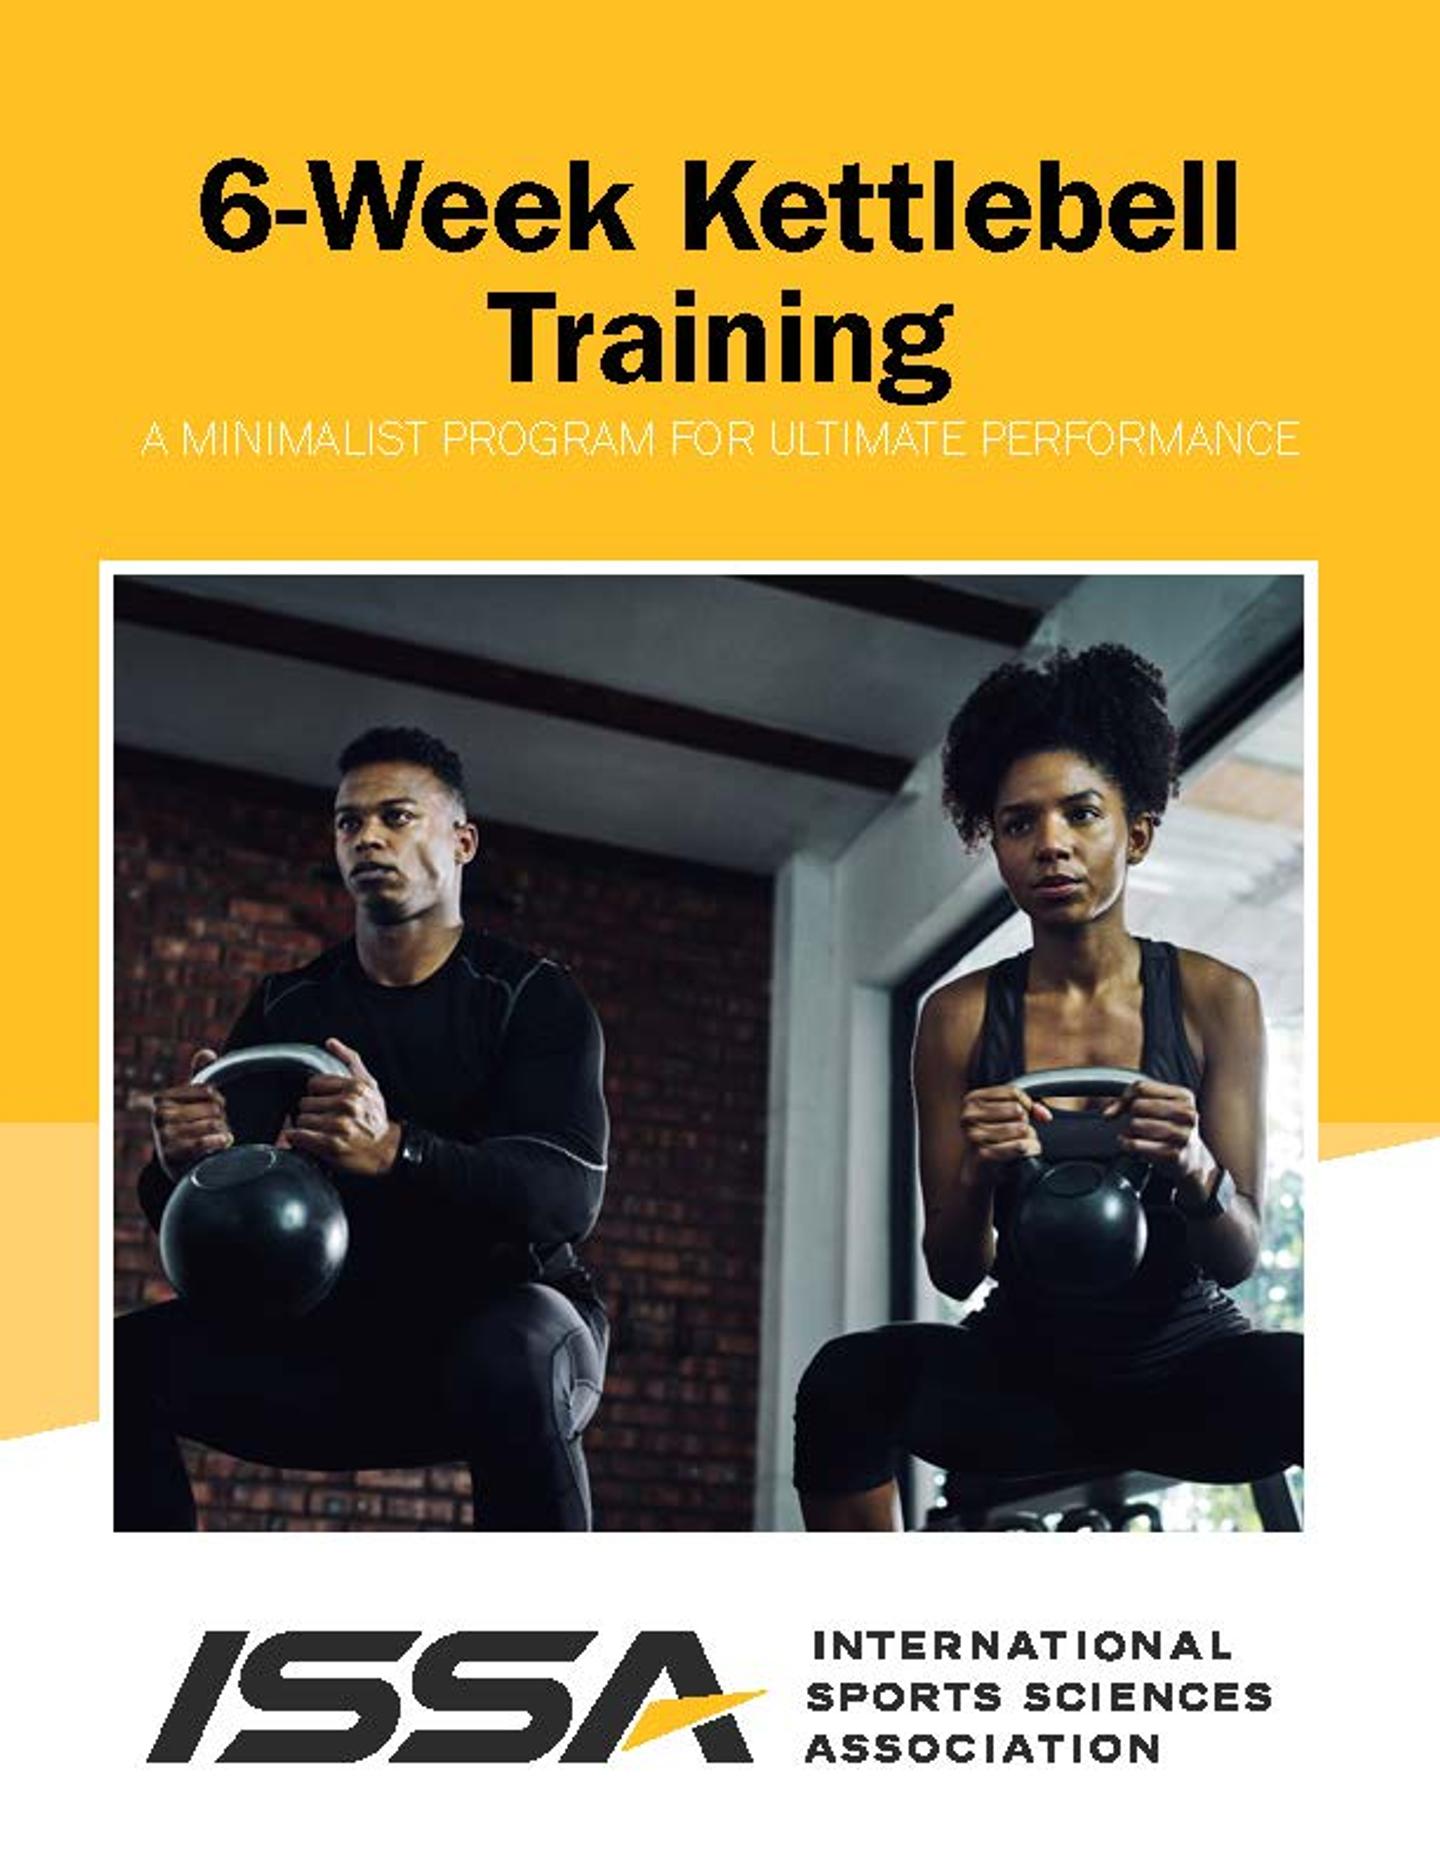 ISSA, International Sports Sciences Association, Certified Personal Trainer, ISSAonline, Kettlebell Swings: Muscles Worked, Proper Form, and More, Kettlebell Ebook